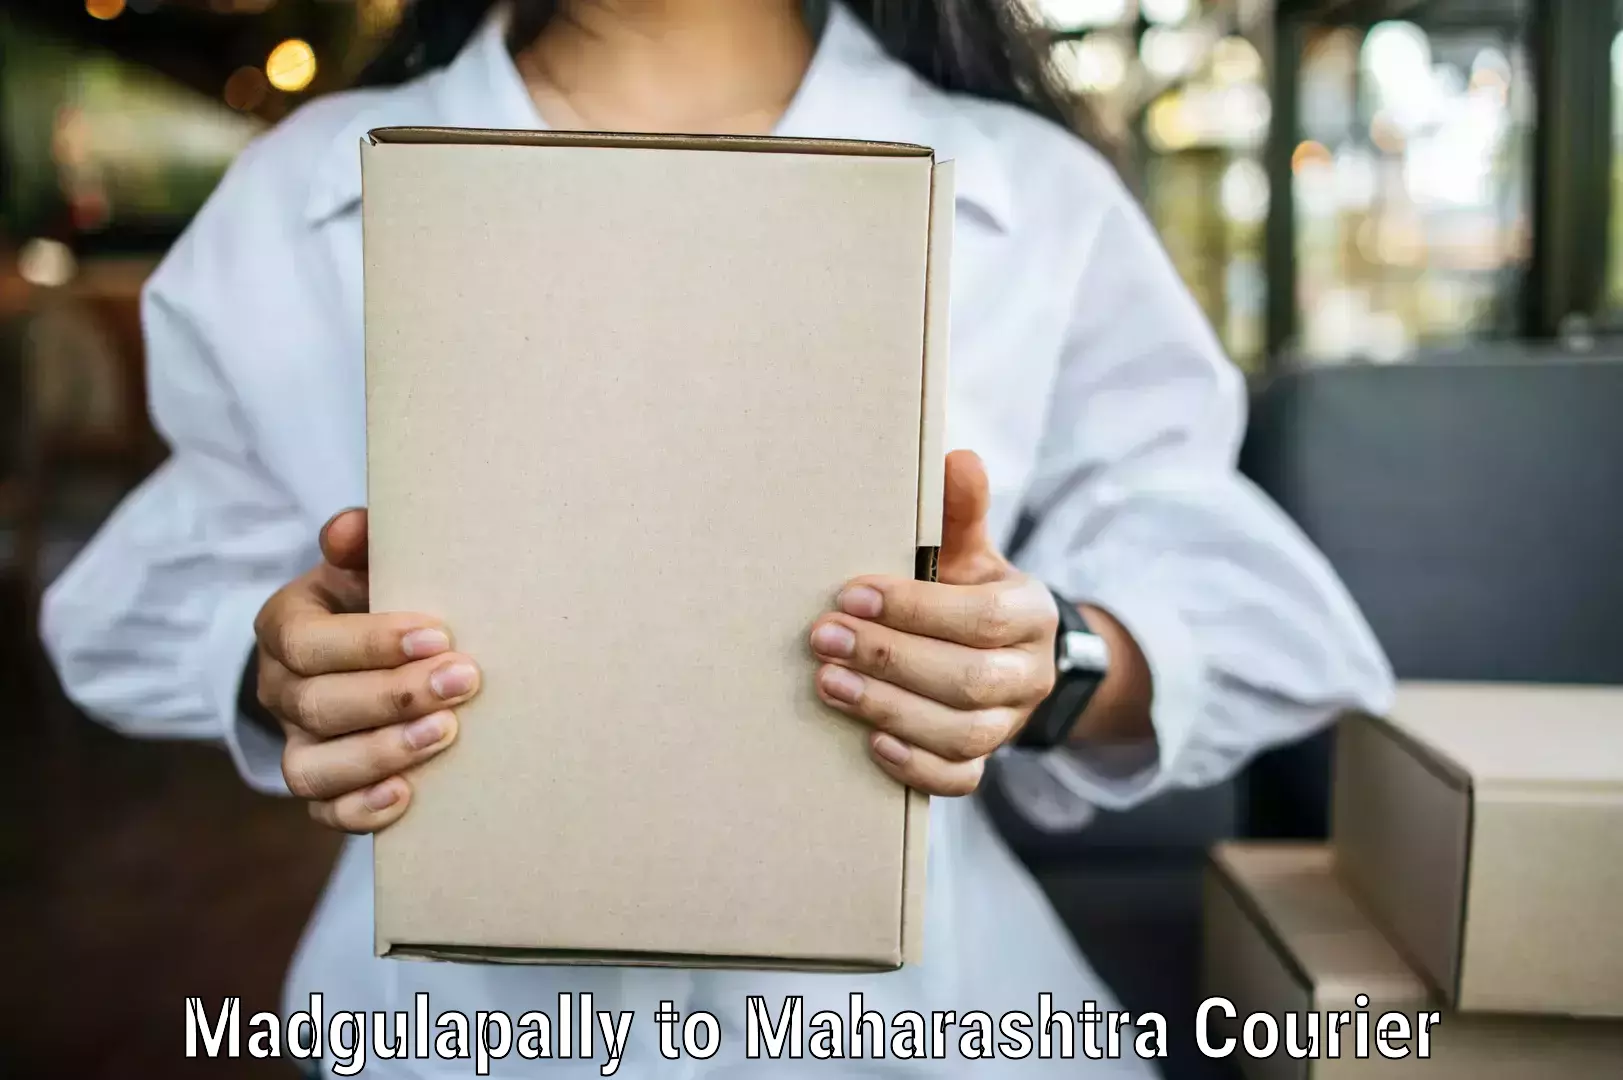 Courier service partnerships Madgulapally to Kagal